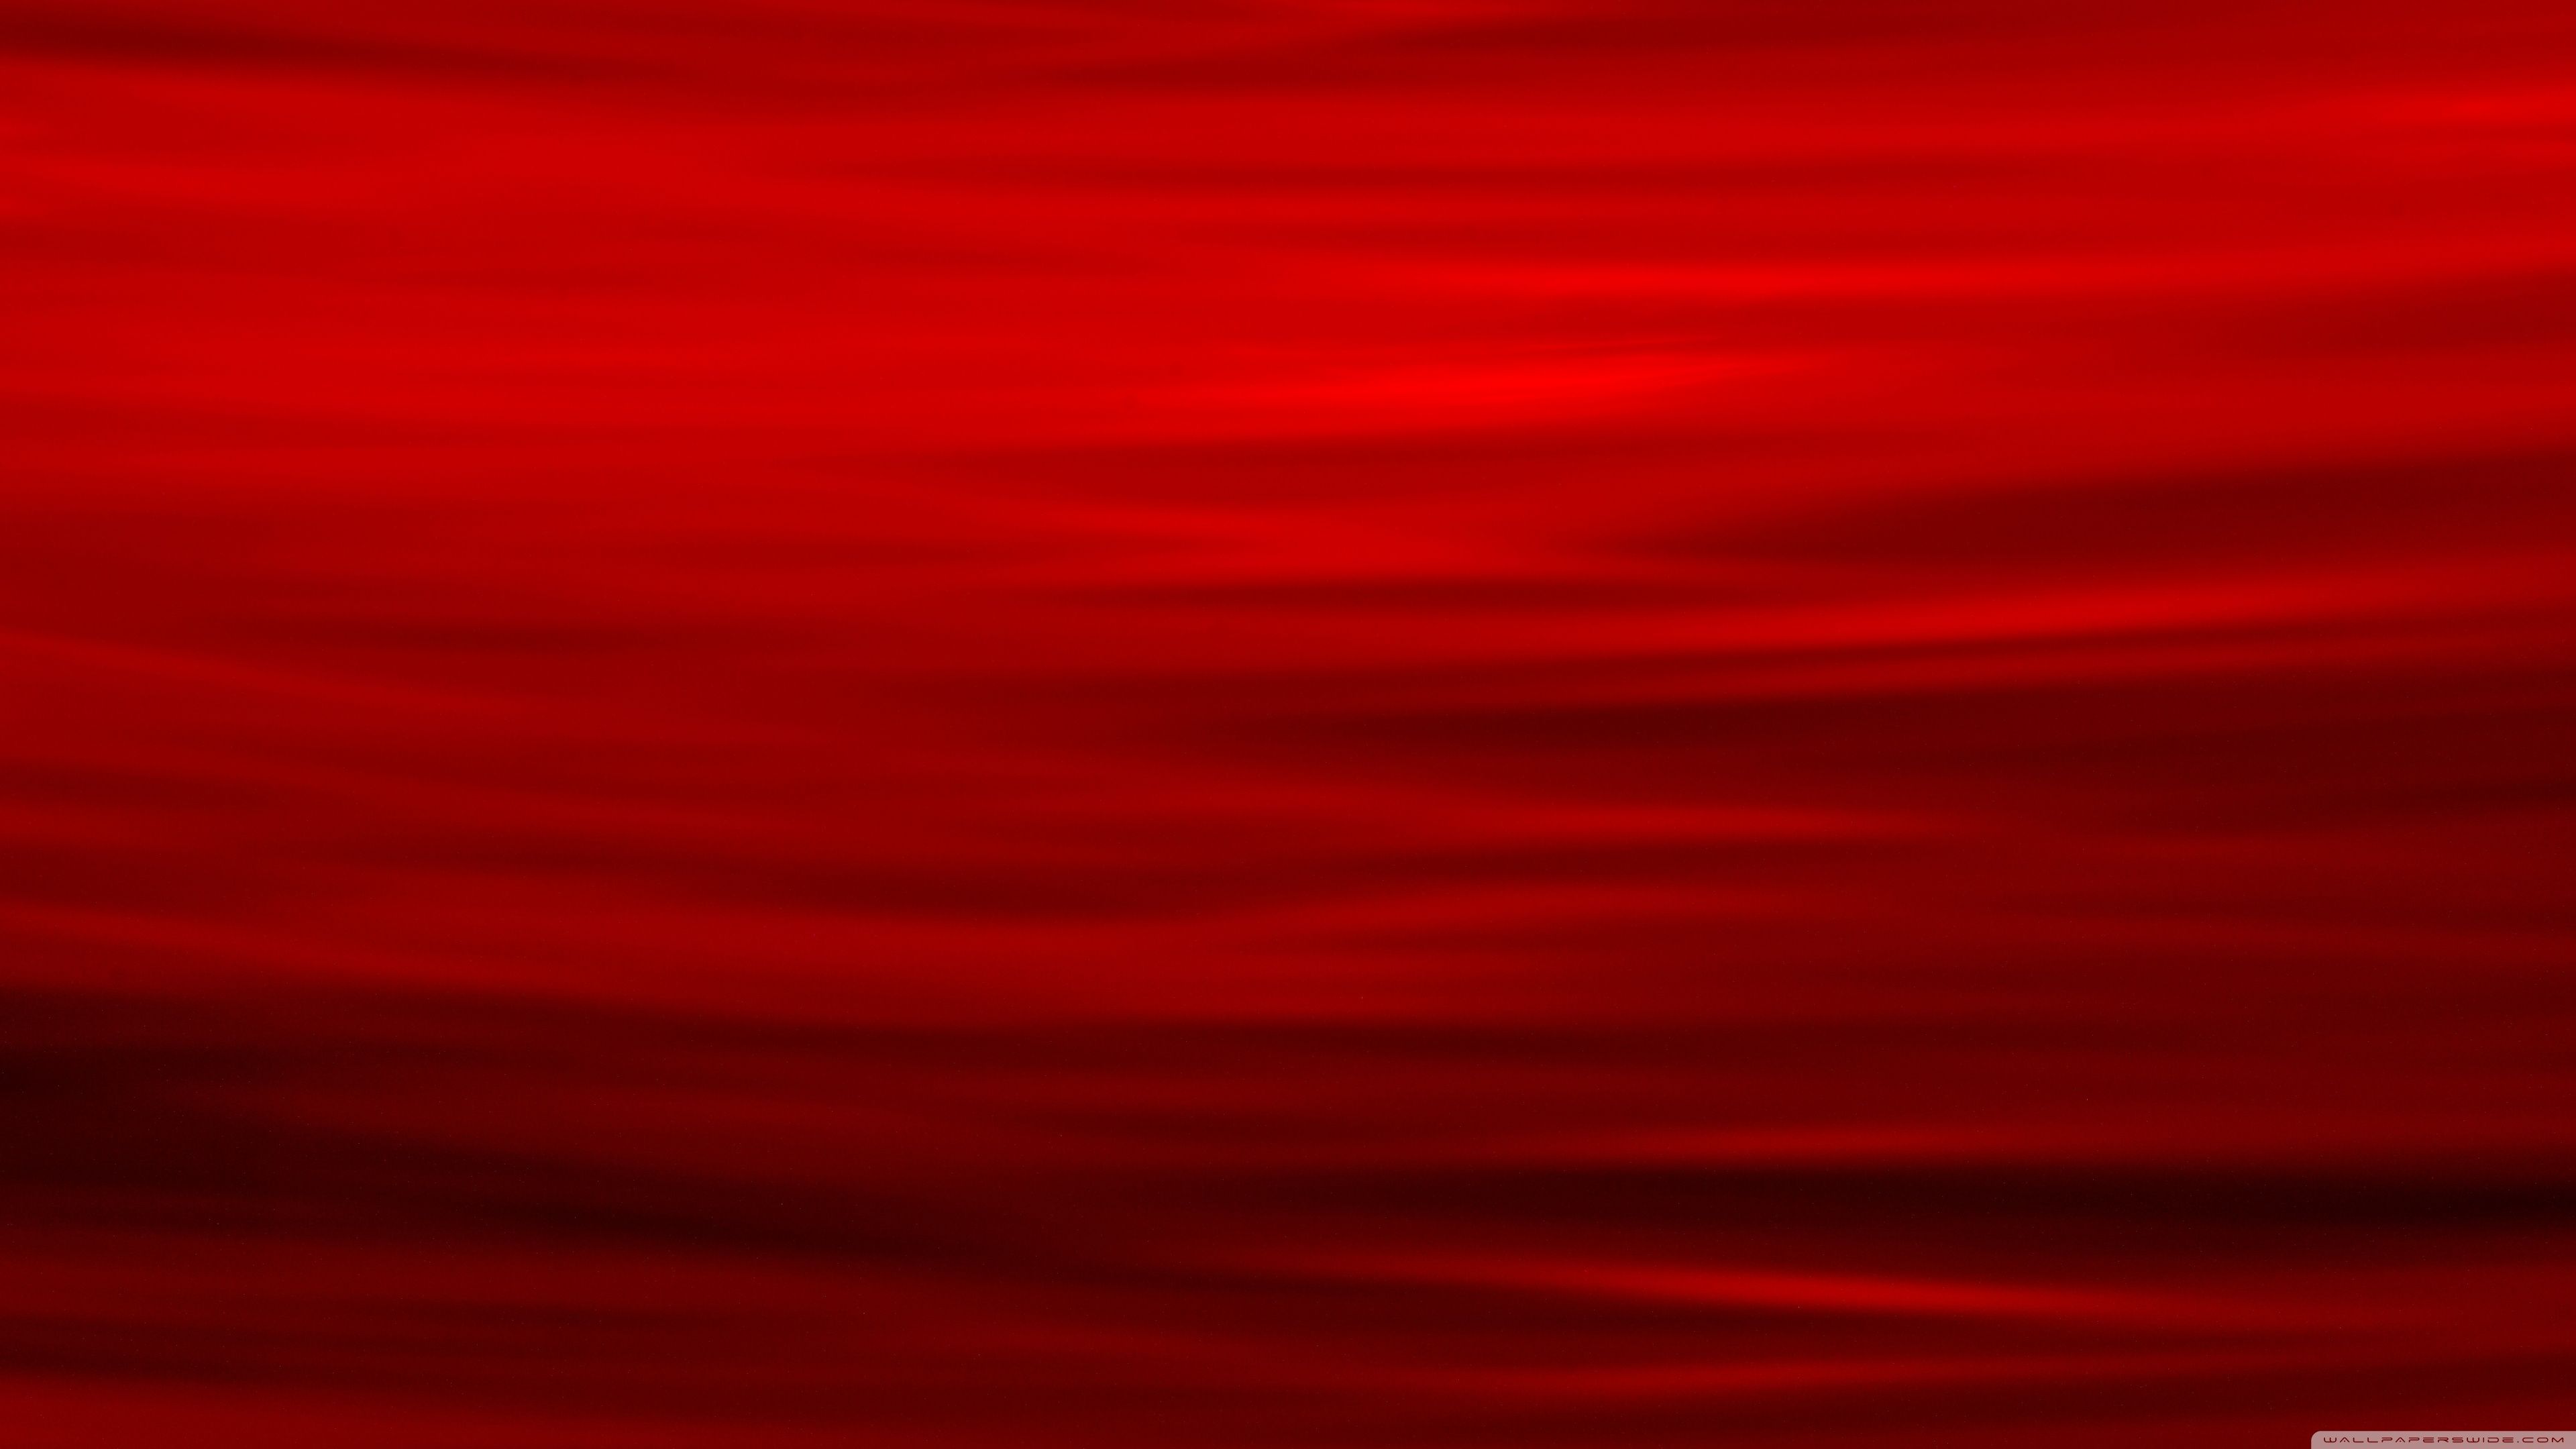 Red 4K UHD Wallpaper Free Red 4K UHD Background